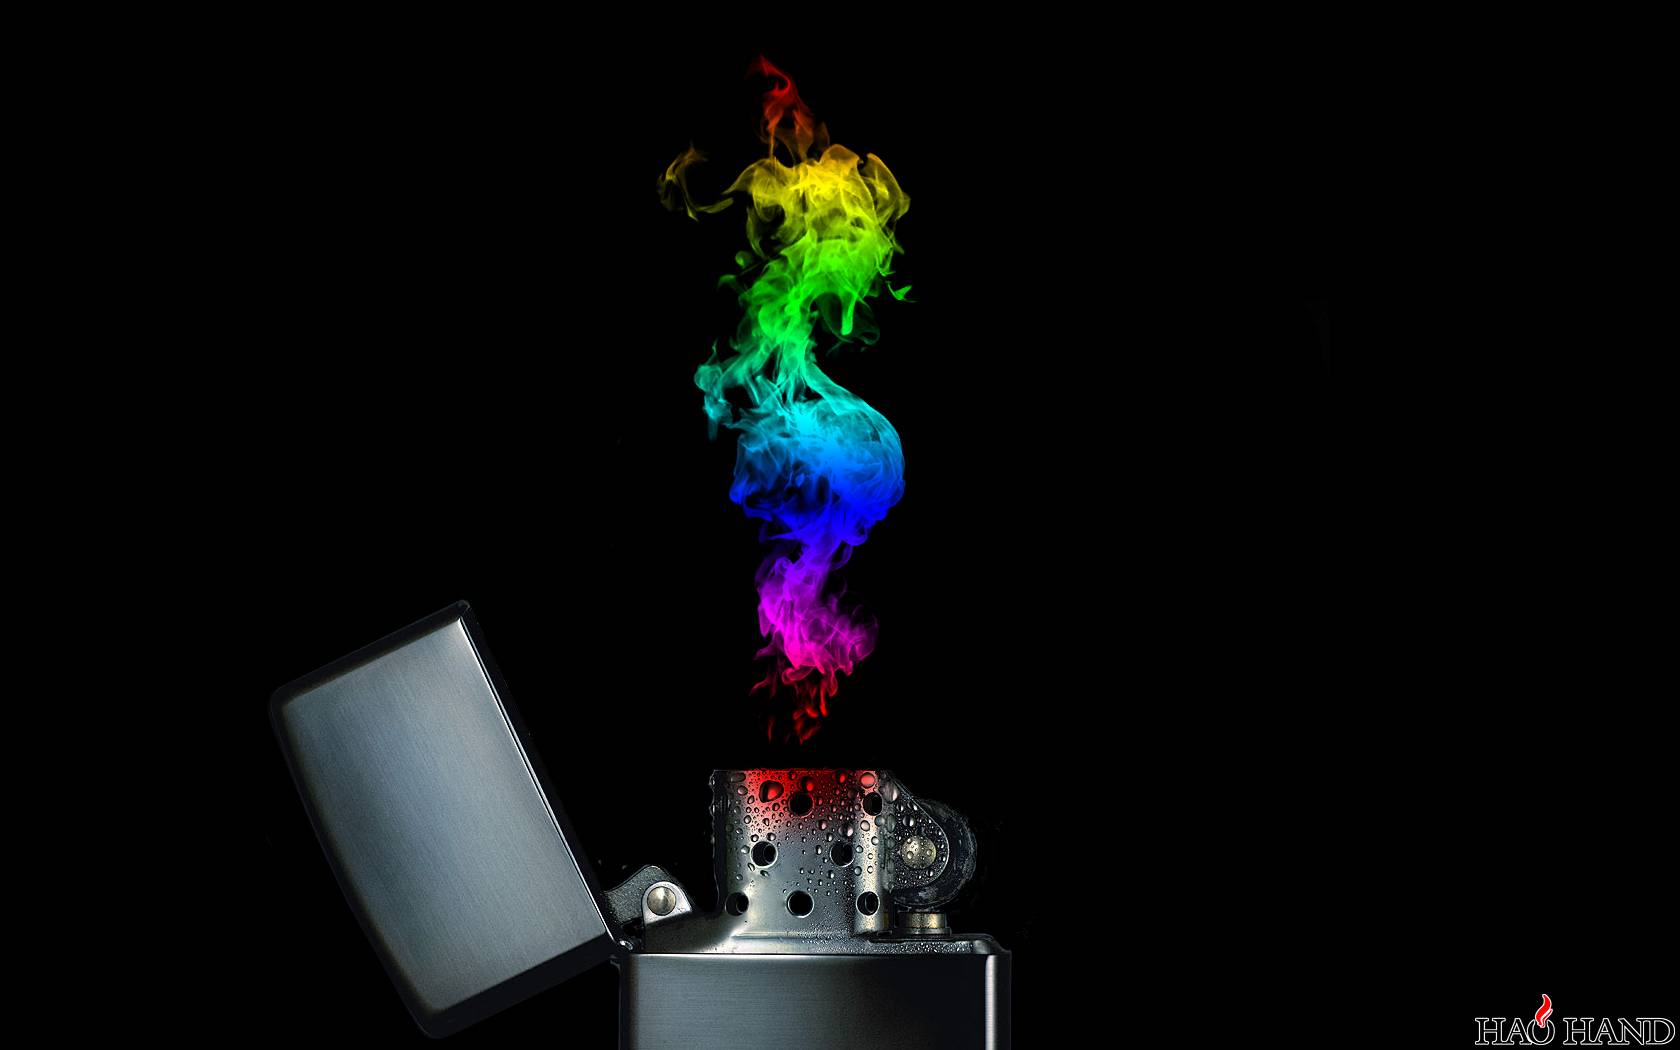 rainbow_flame_zippo_by_andrewdile-d38r1h8.jpg